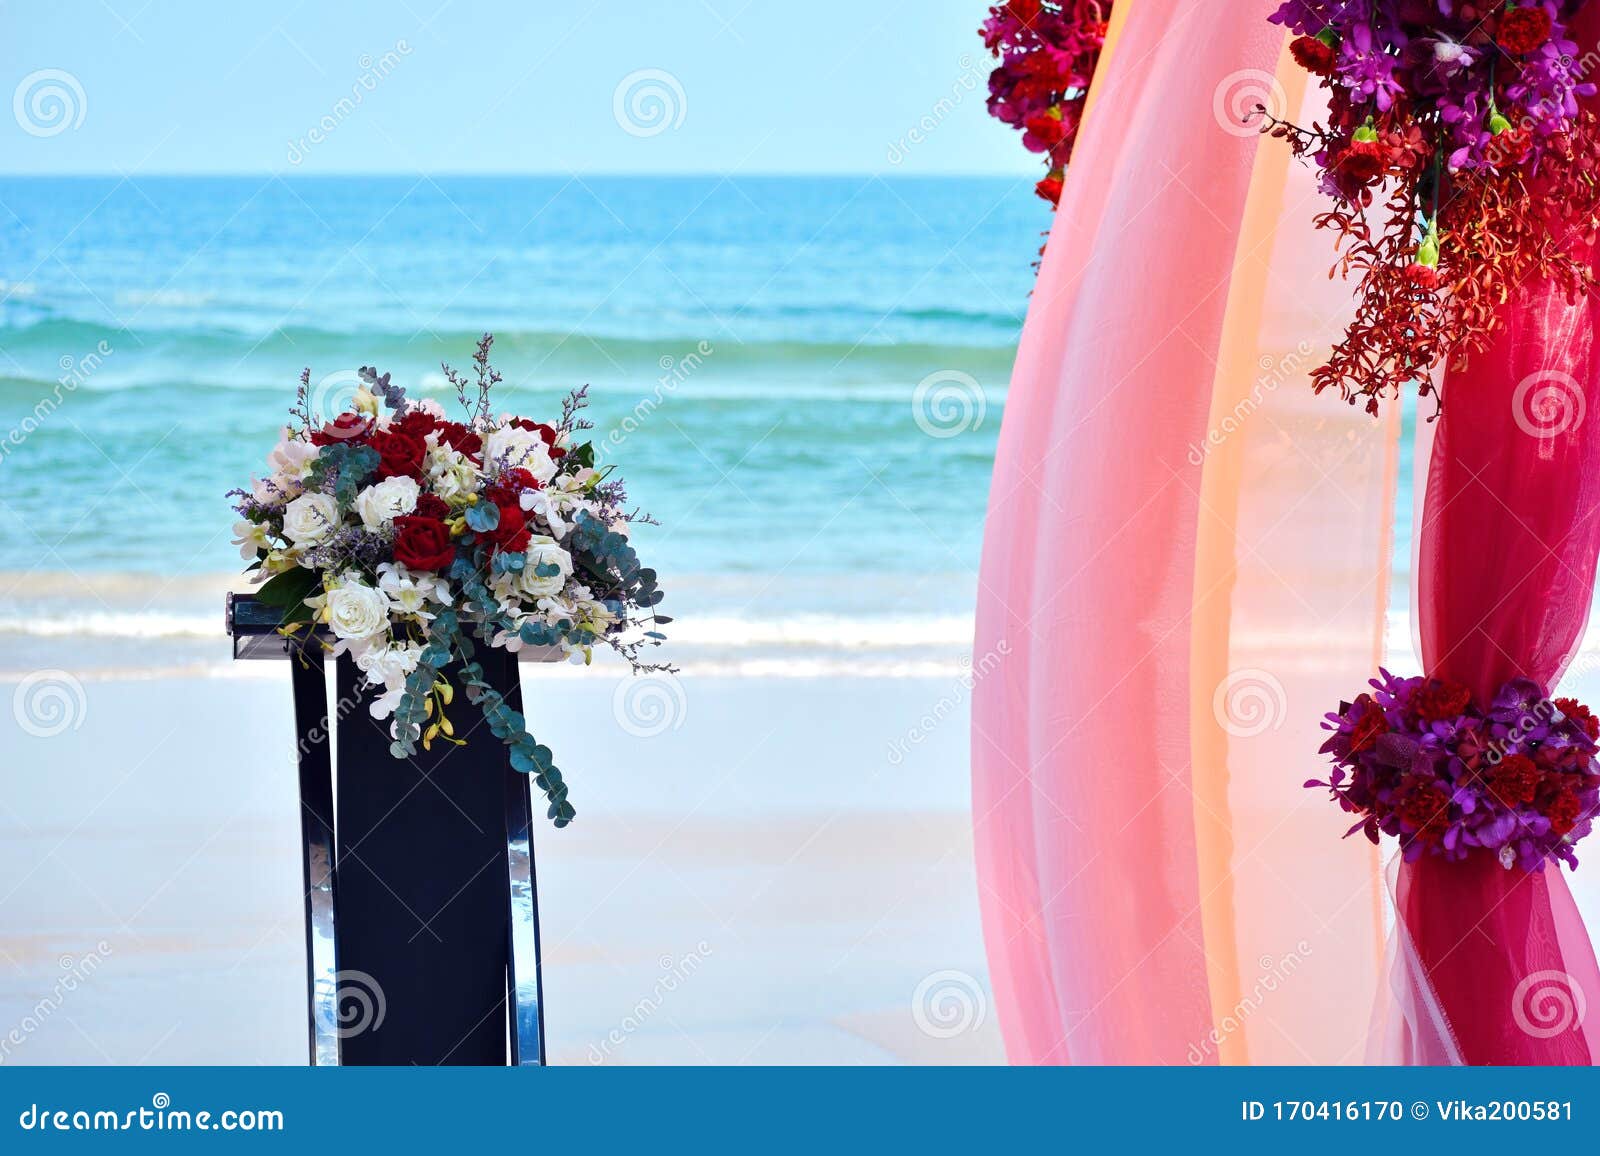 Wedding Decorations on the Beach. the Official Registration of